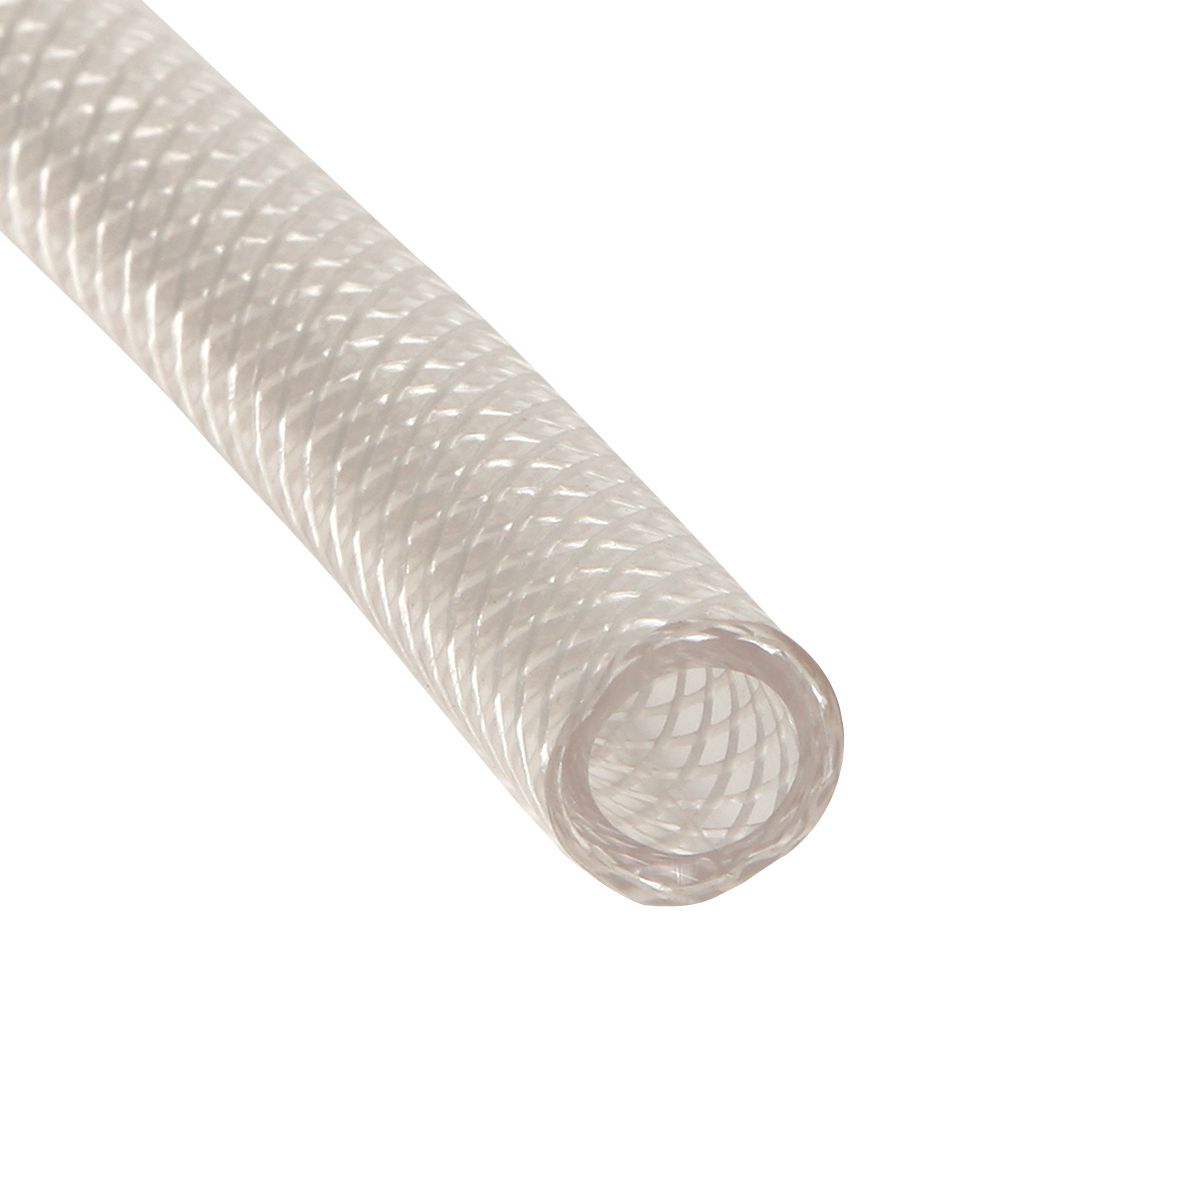 1/2"ID x 3/4"OD Braid Reinforced Clear Vinyl PVC Tubing-1' Increments Continuous 